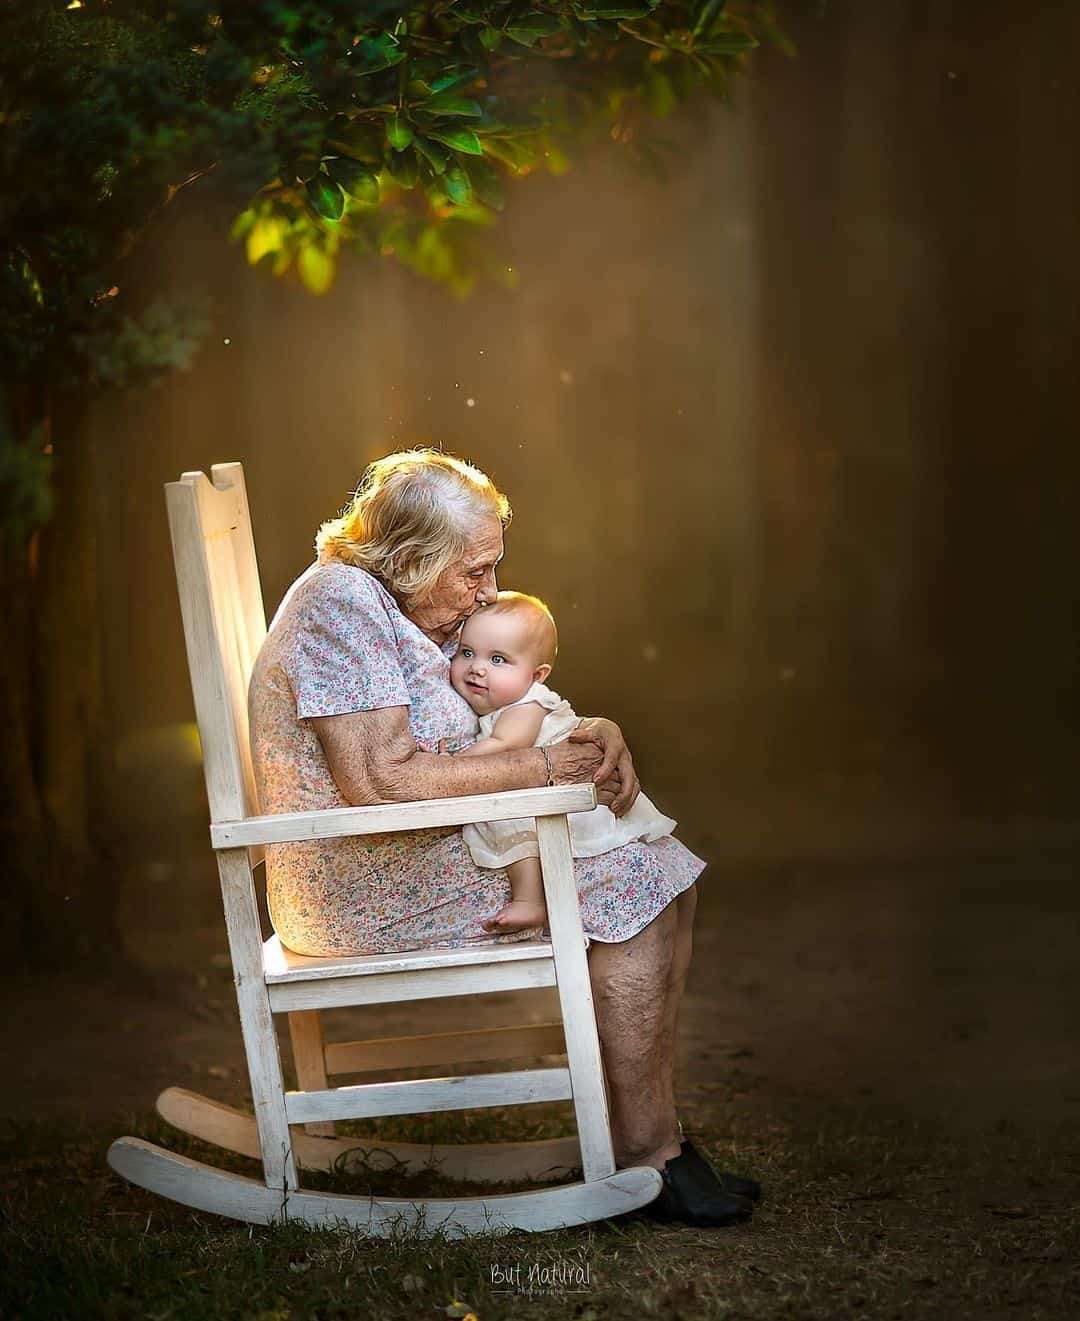 Lovely Children and Family Photography by Sujata Setia